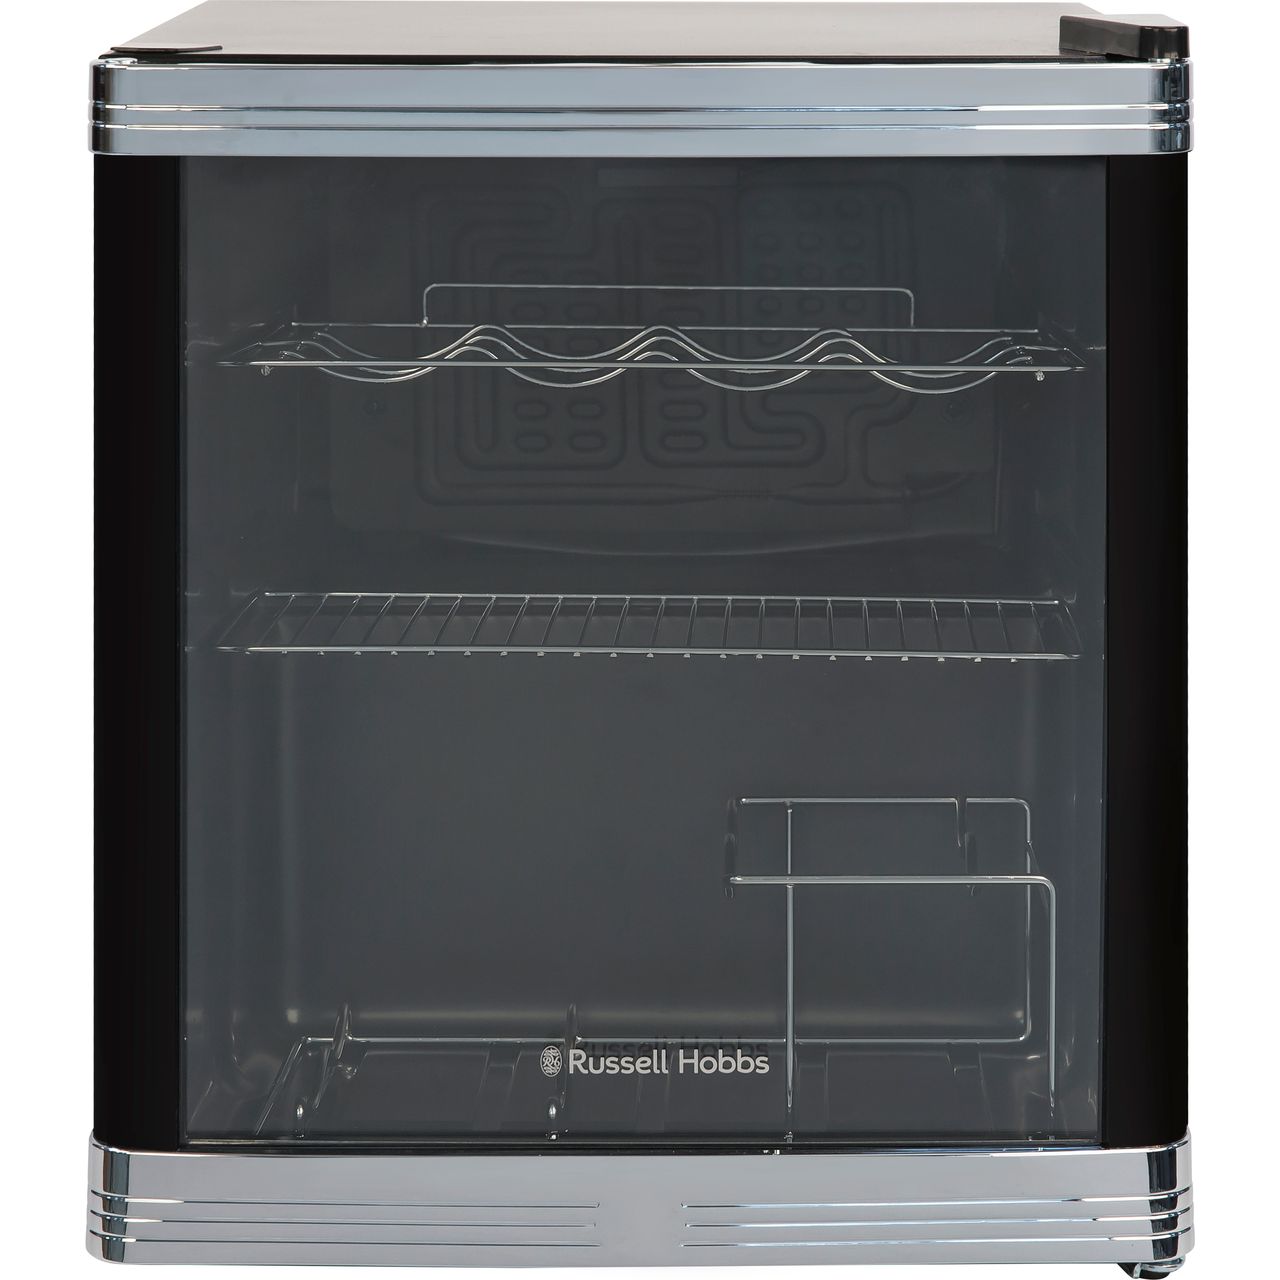 Russell Hobbs RHGWC1B-C Wine Cooler Review